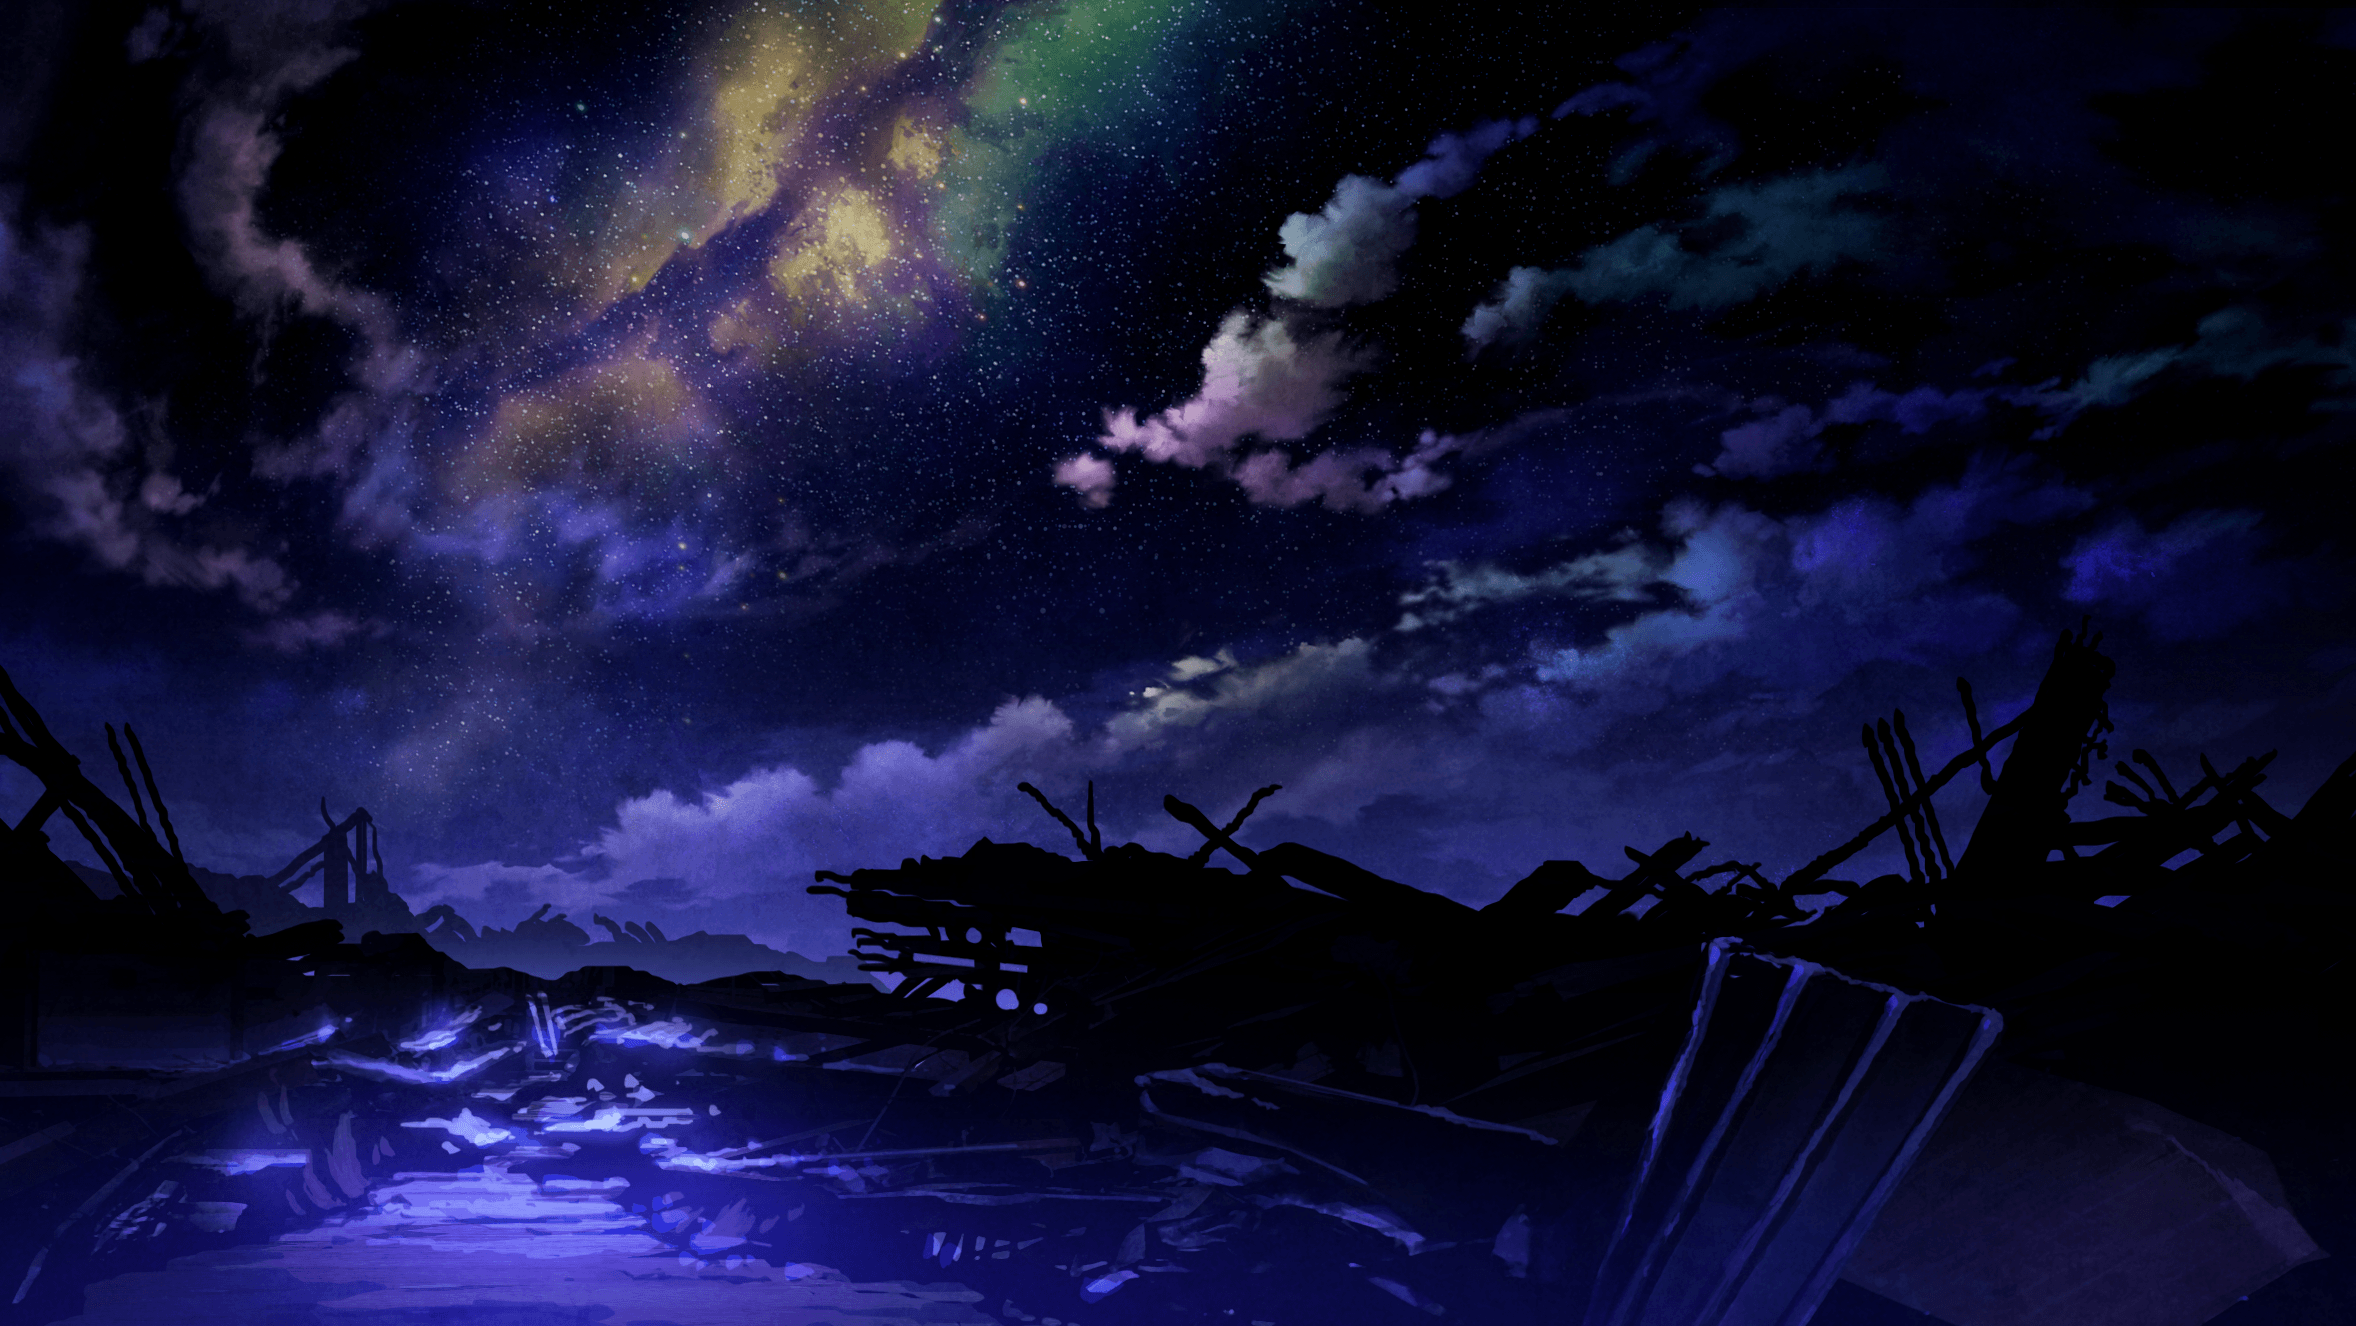 Anime Scenery Wallpapers - Top 21 Best Anime Scenery Wallpapers [ HQ ]